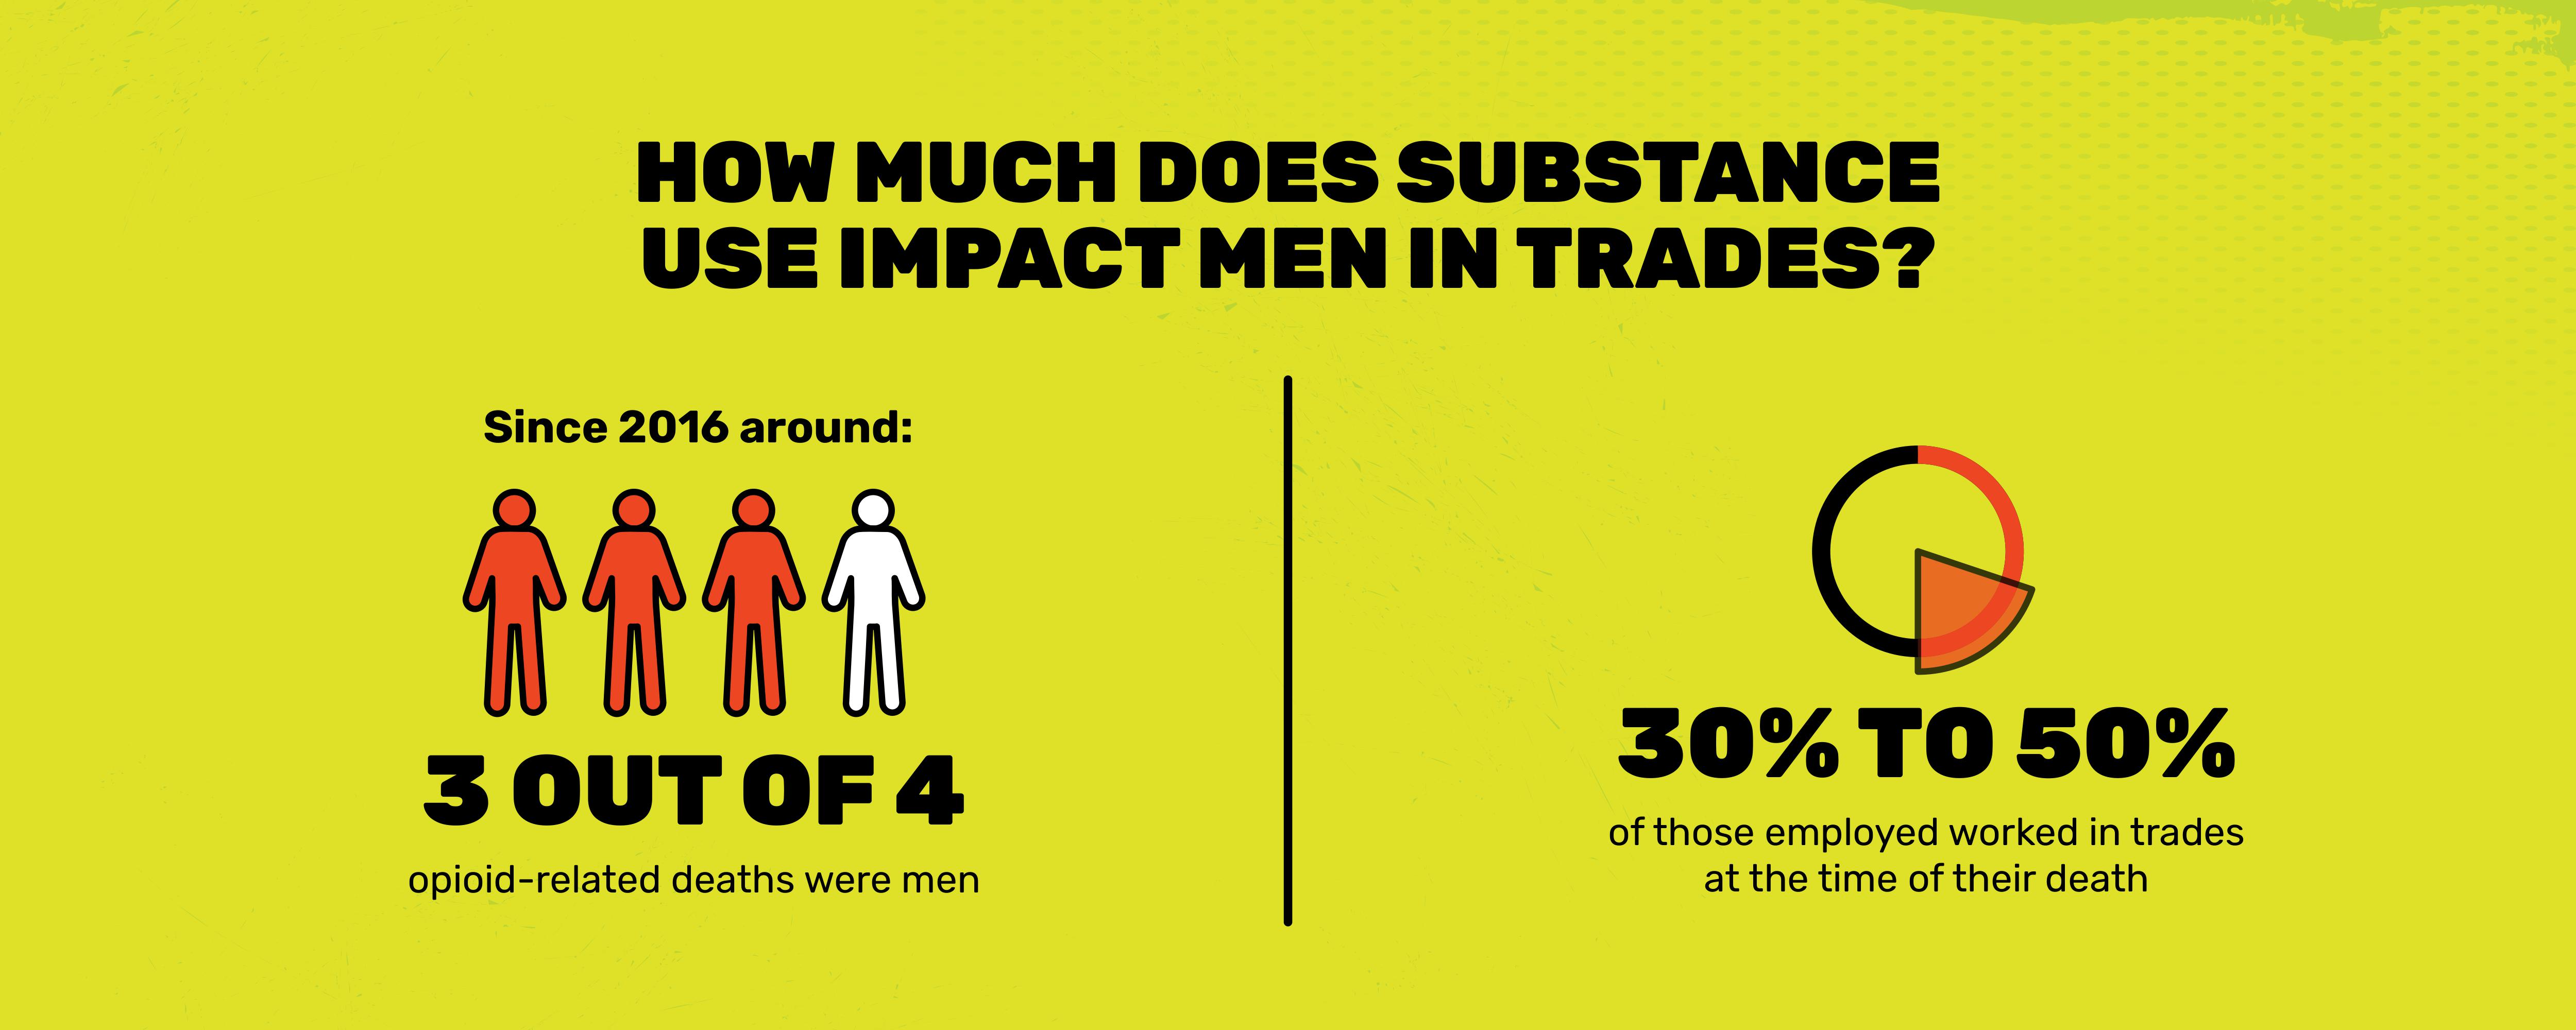 An image showing how much men in trades have been impacted by substance use. Text version below.